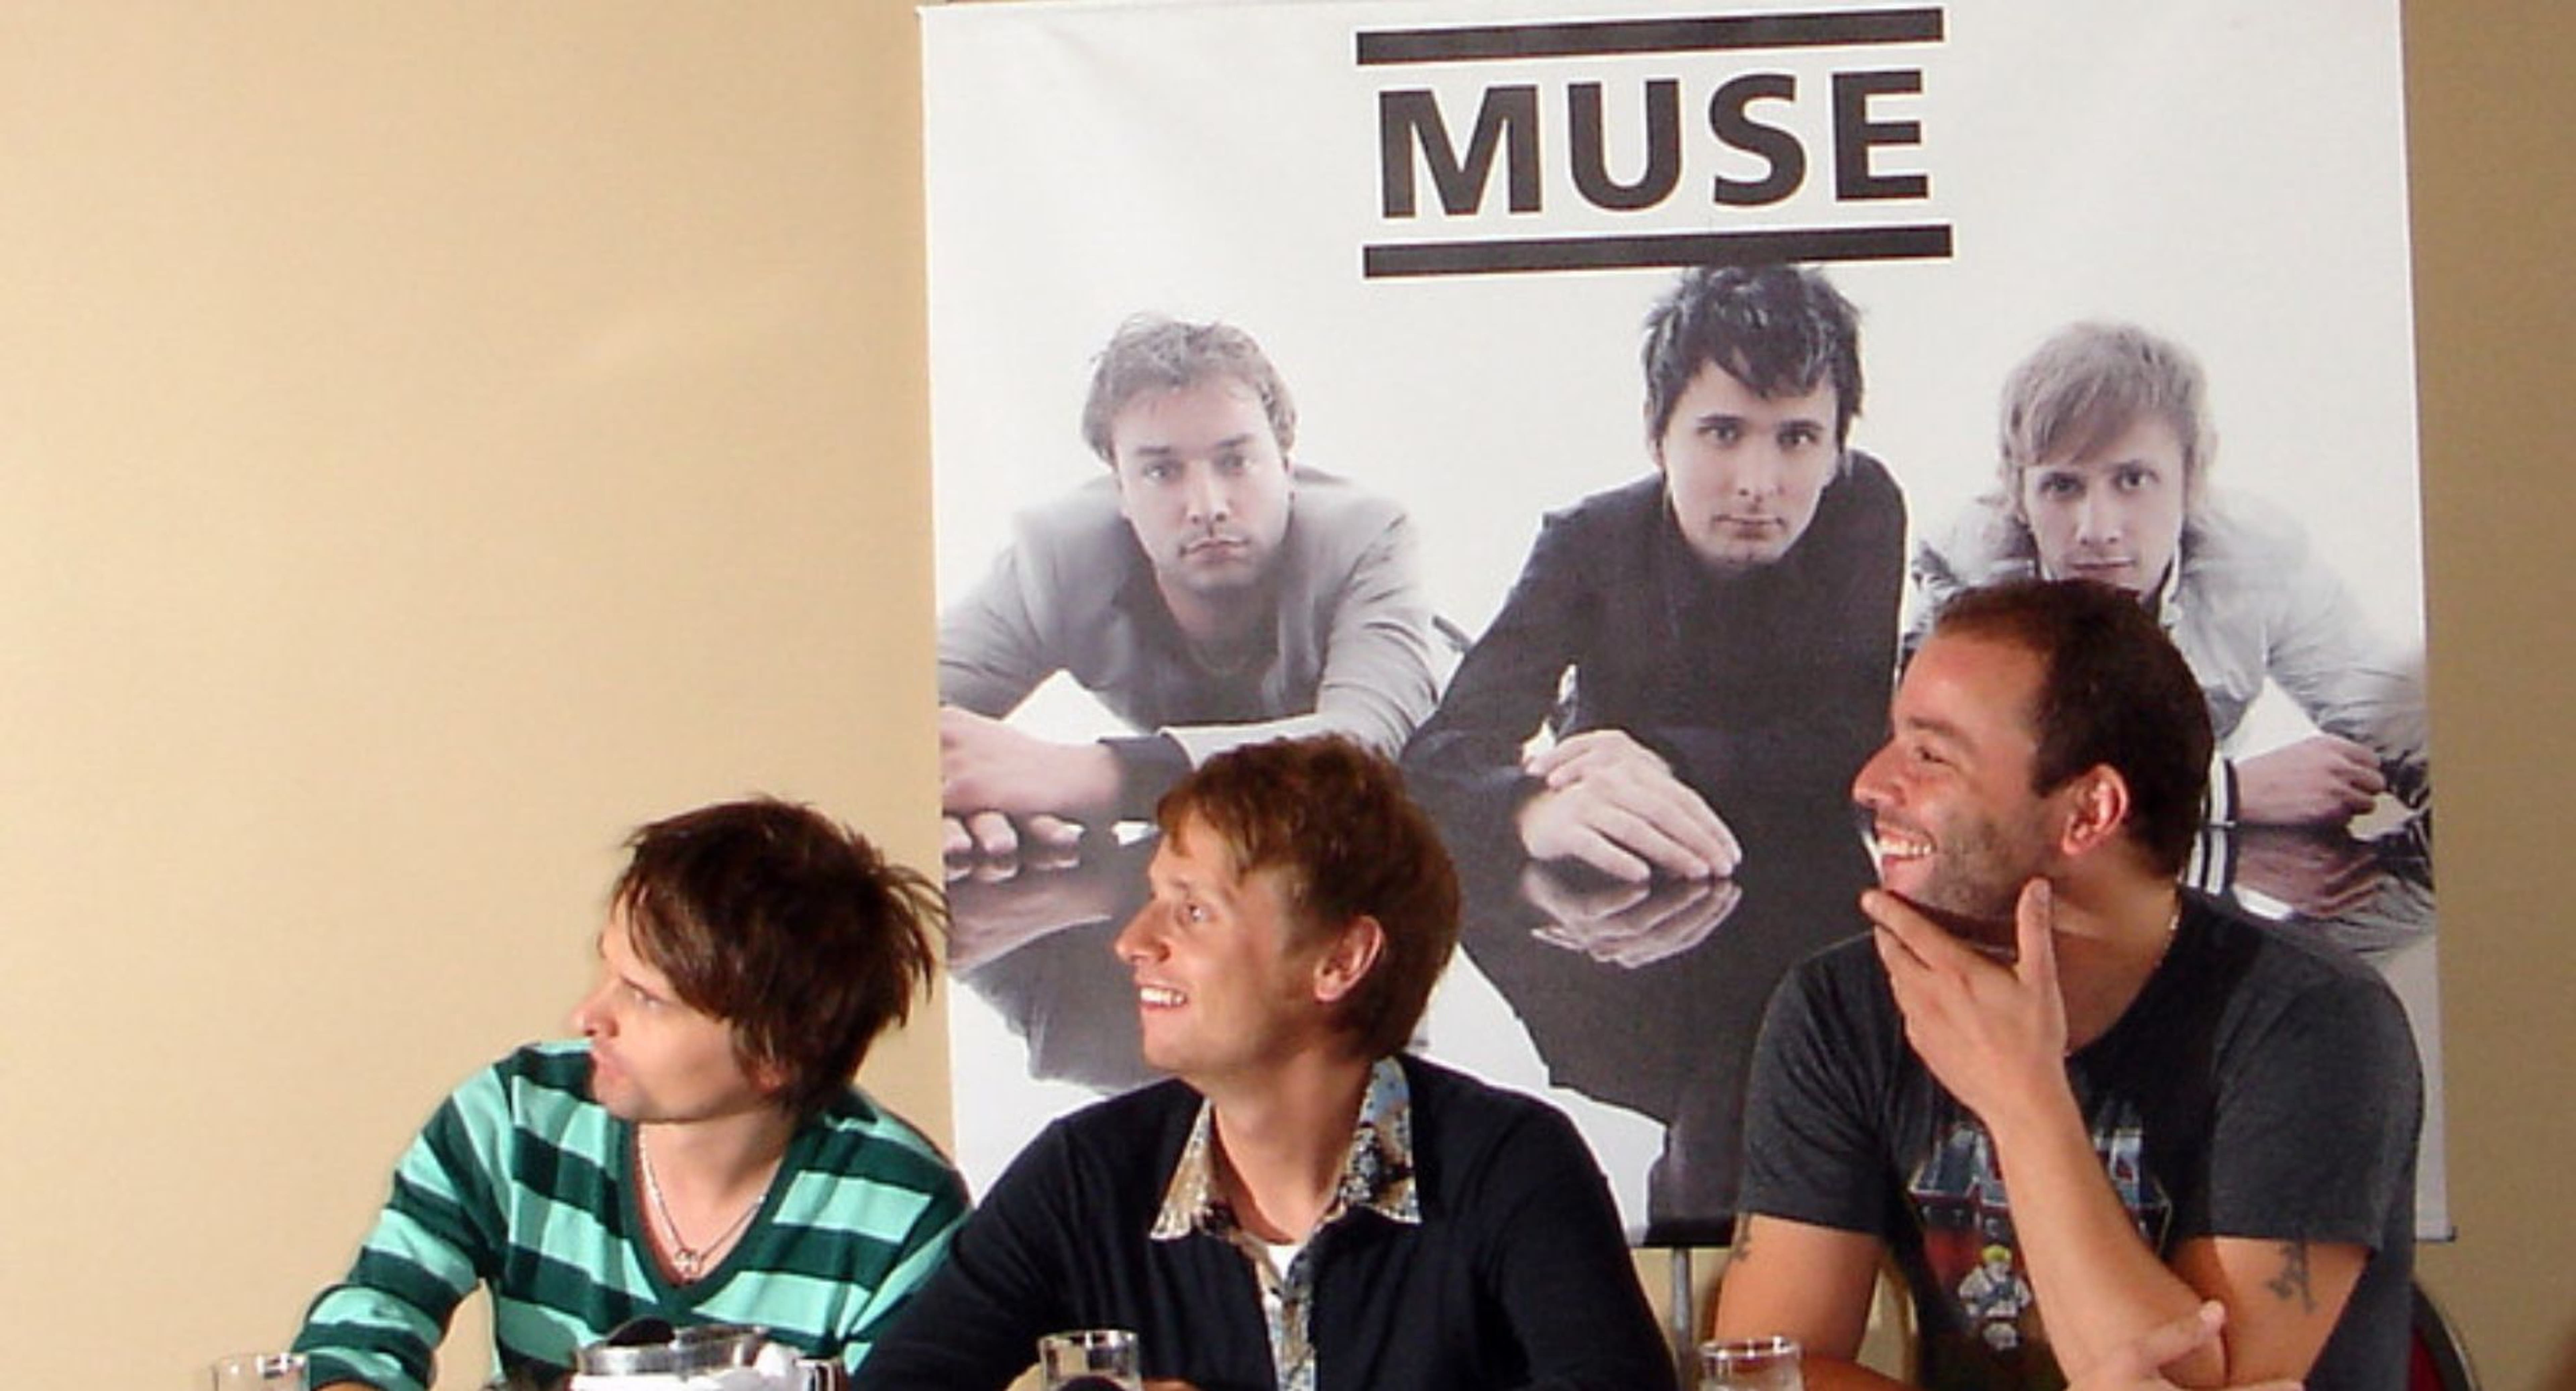 Rock Band Muse Releasing Next Album As NFT: What Investors And Fans Should Know